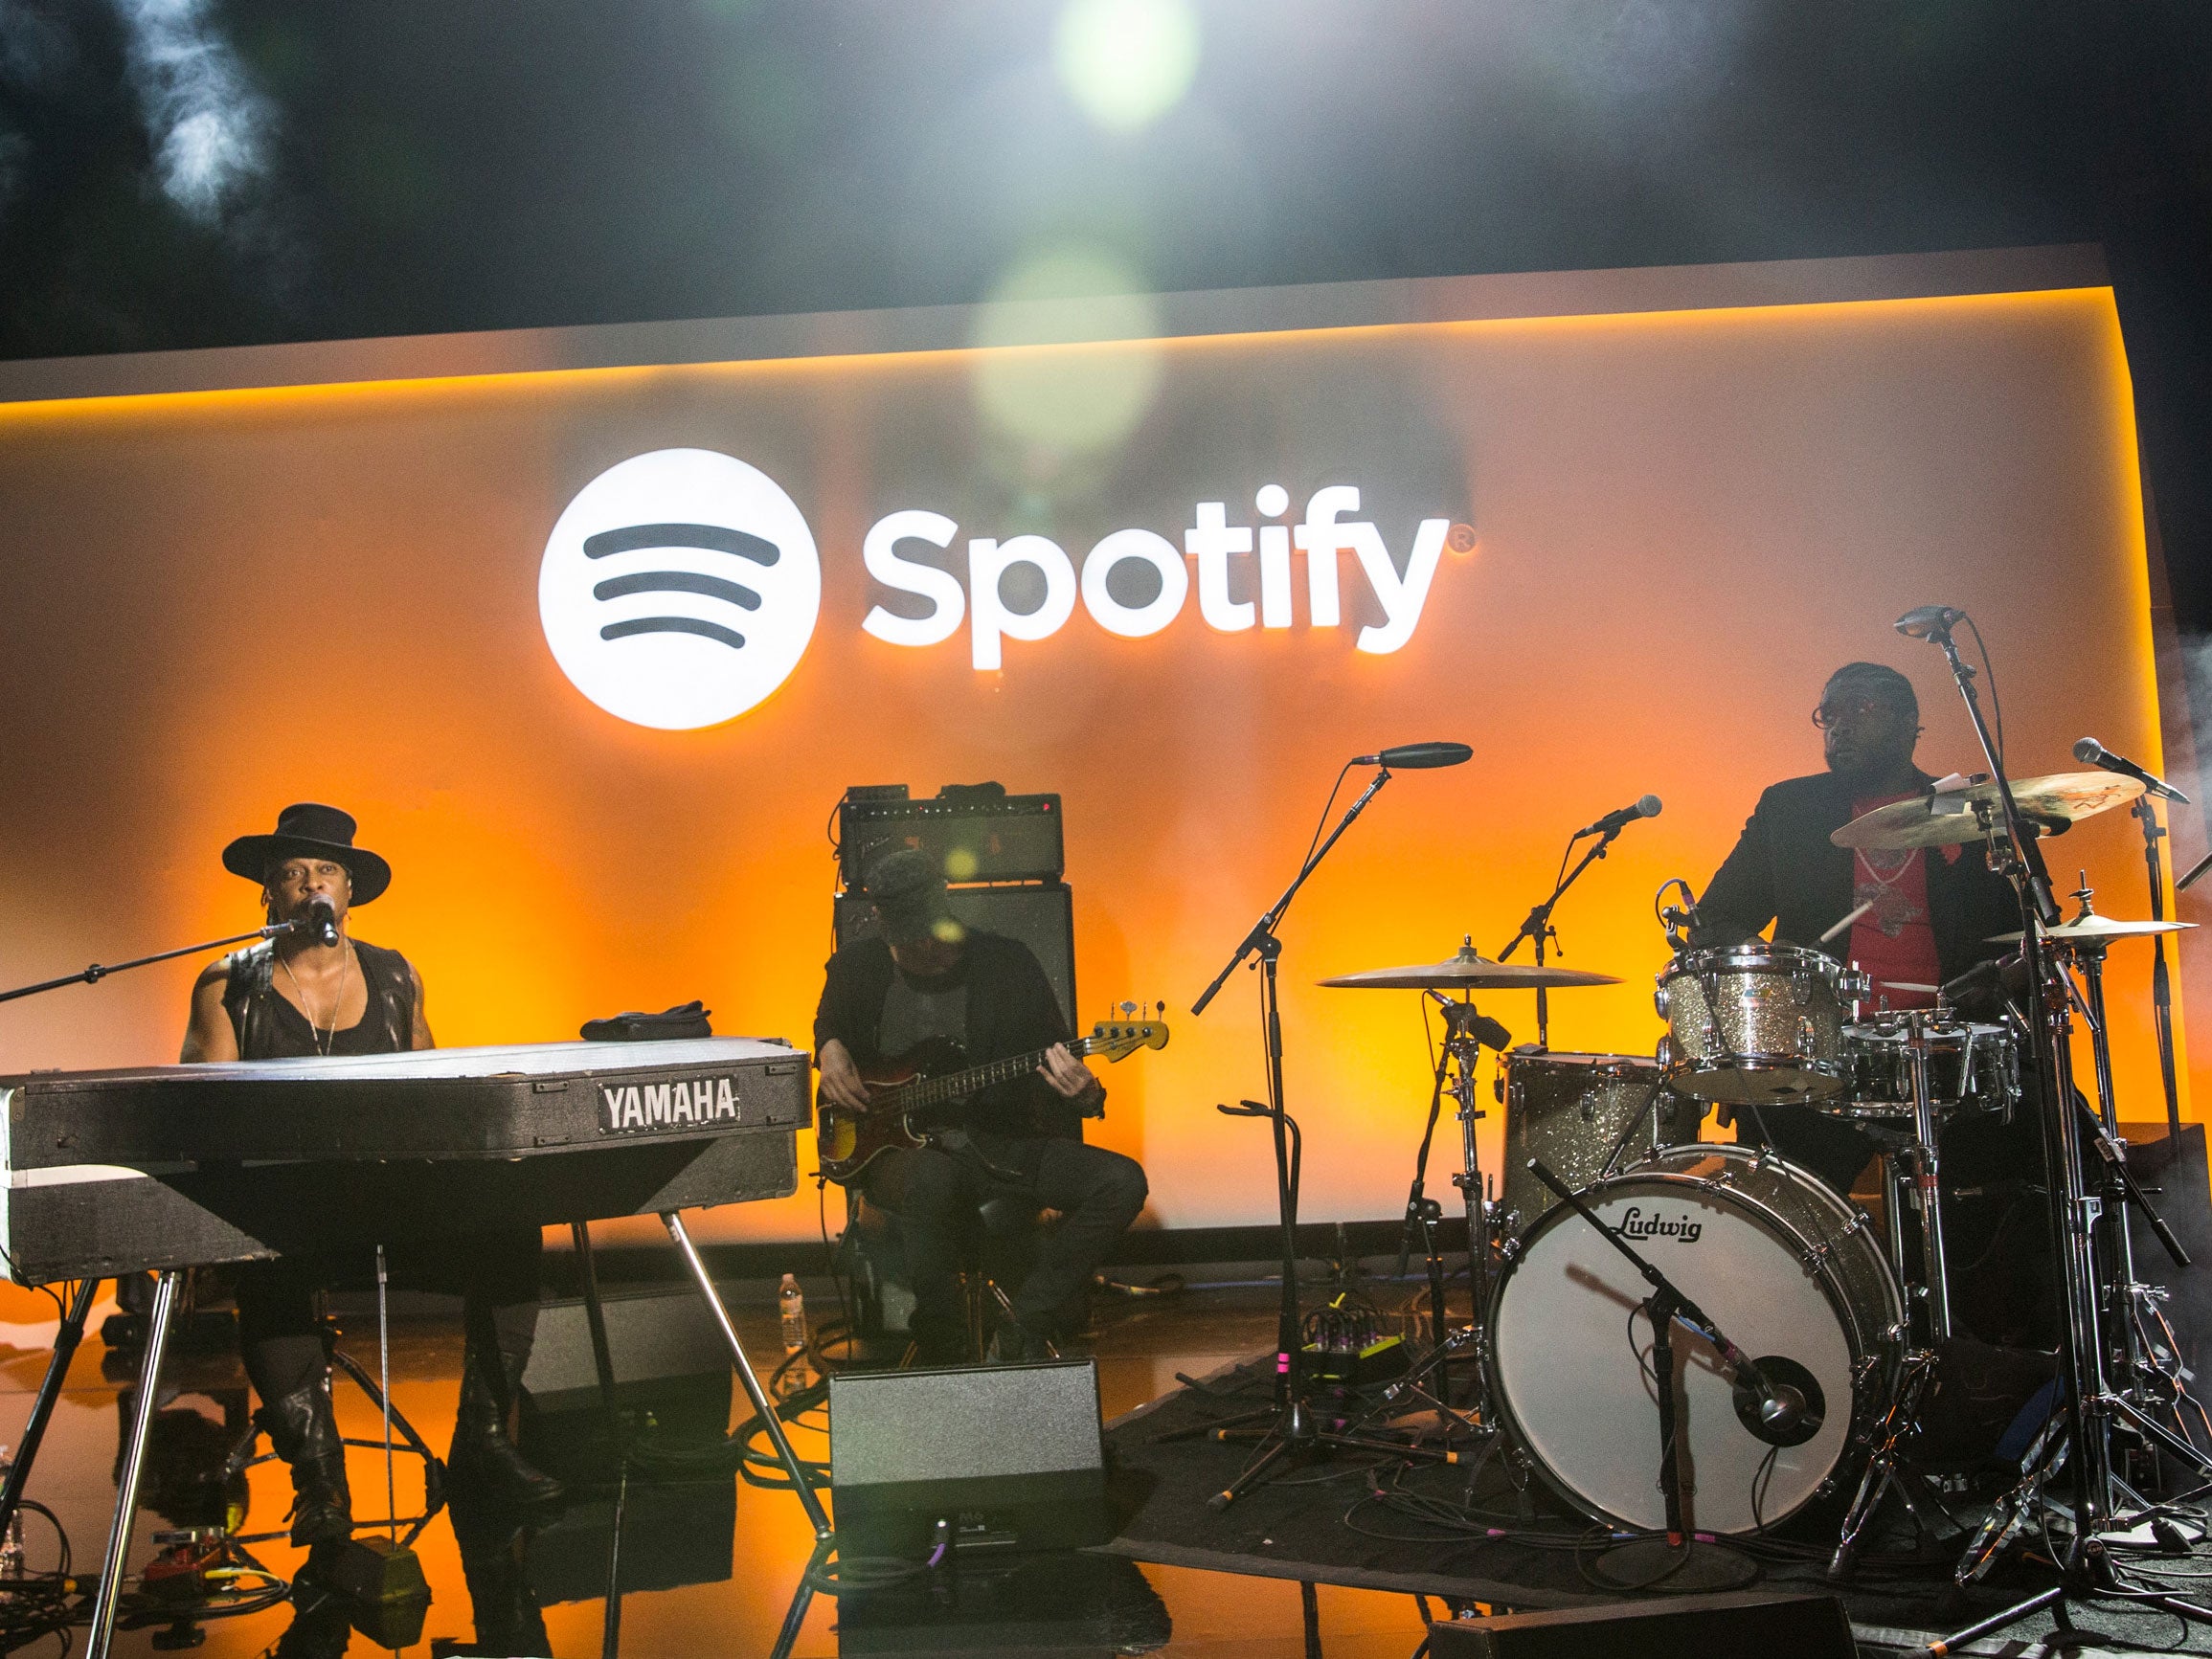 Spotify's privacy policy is causing concern for music fans